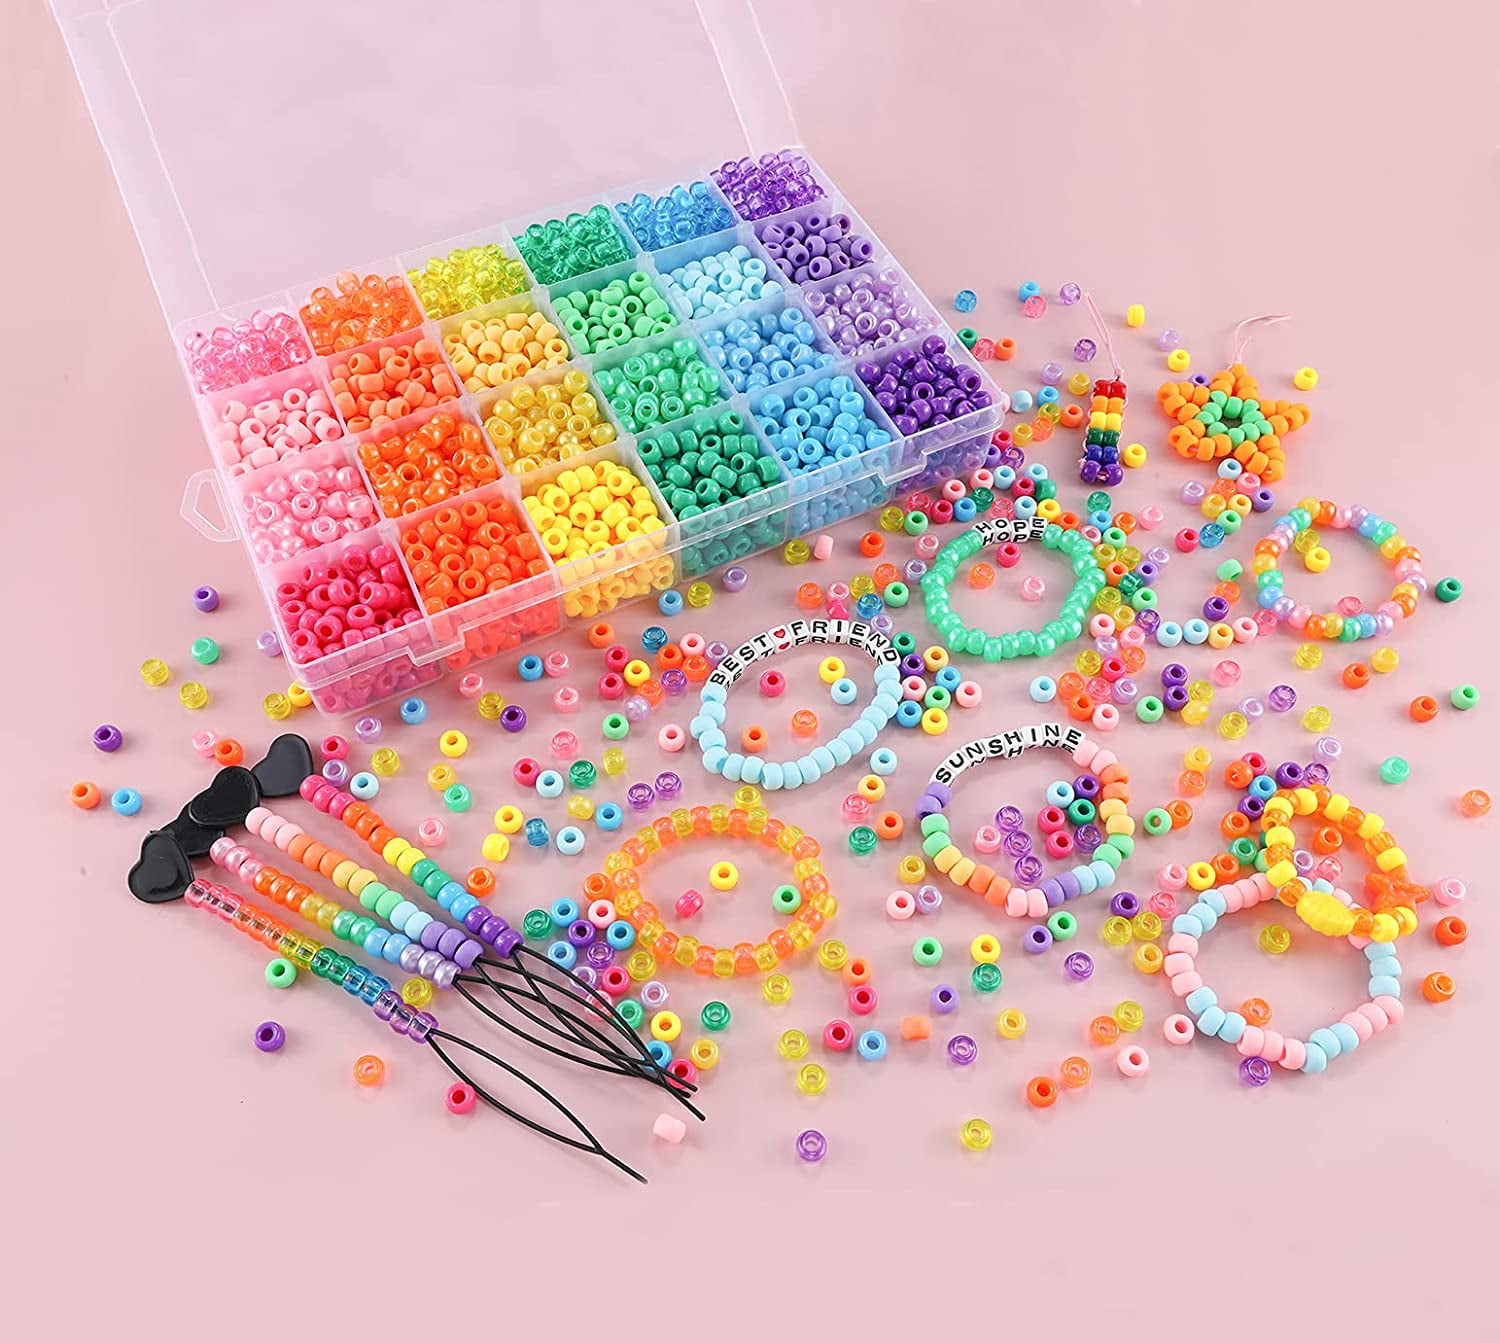  Incraftables Pony Beads for Bracelets Making 9mm (32 Colors).  Large Rainbow Pony Bead Bulk Kit for DIY Jewelry & Hair Craft. Plastic  Kandi Bead Set (730pcs) w/Alphabet Letter, Small Colorful Spacers